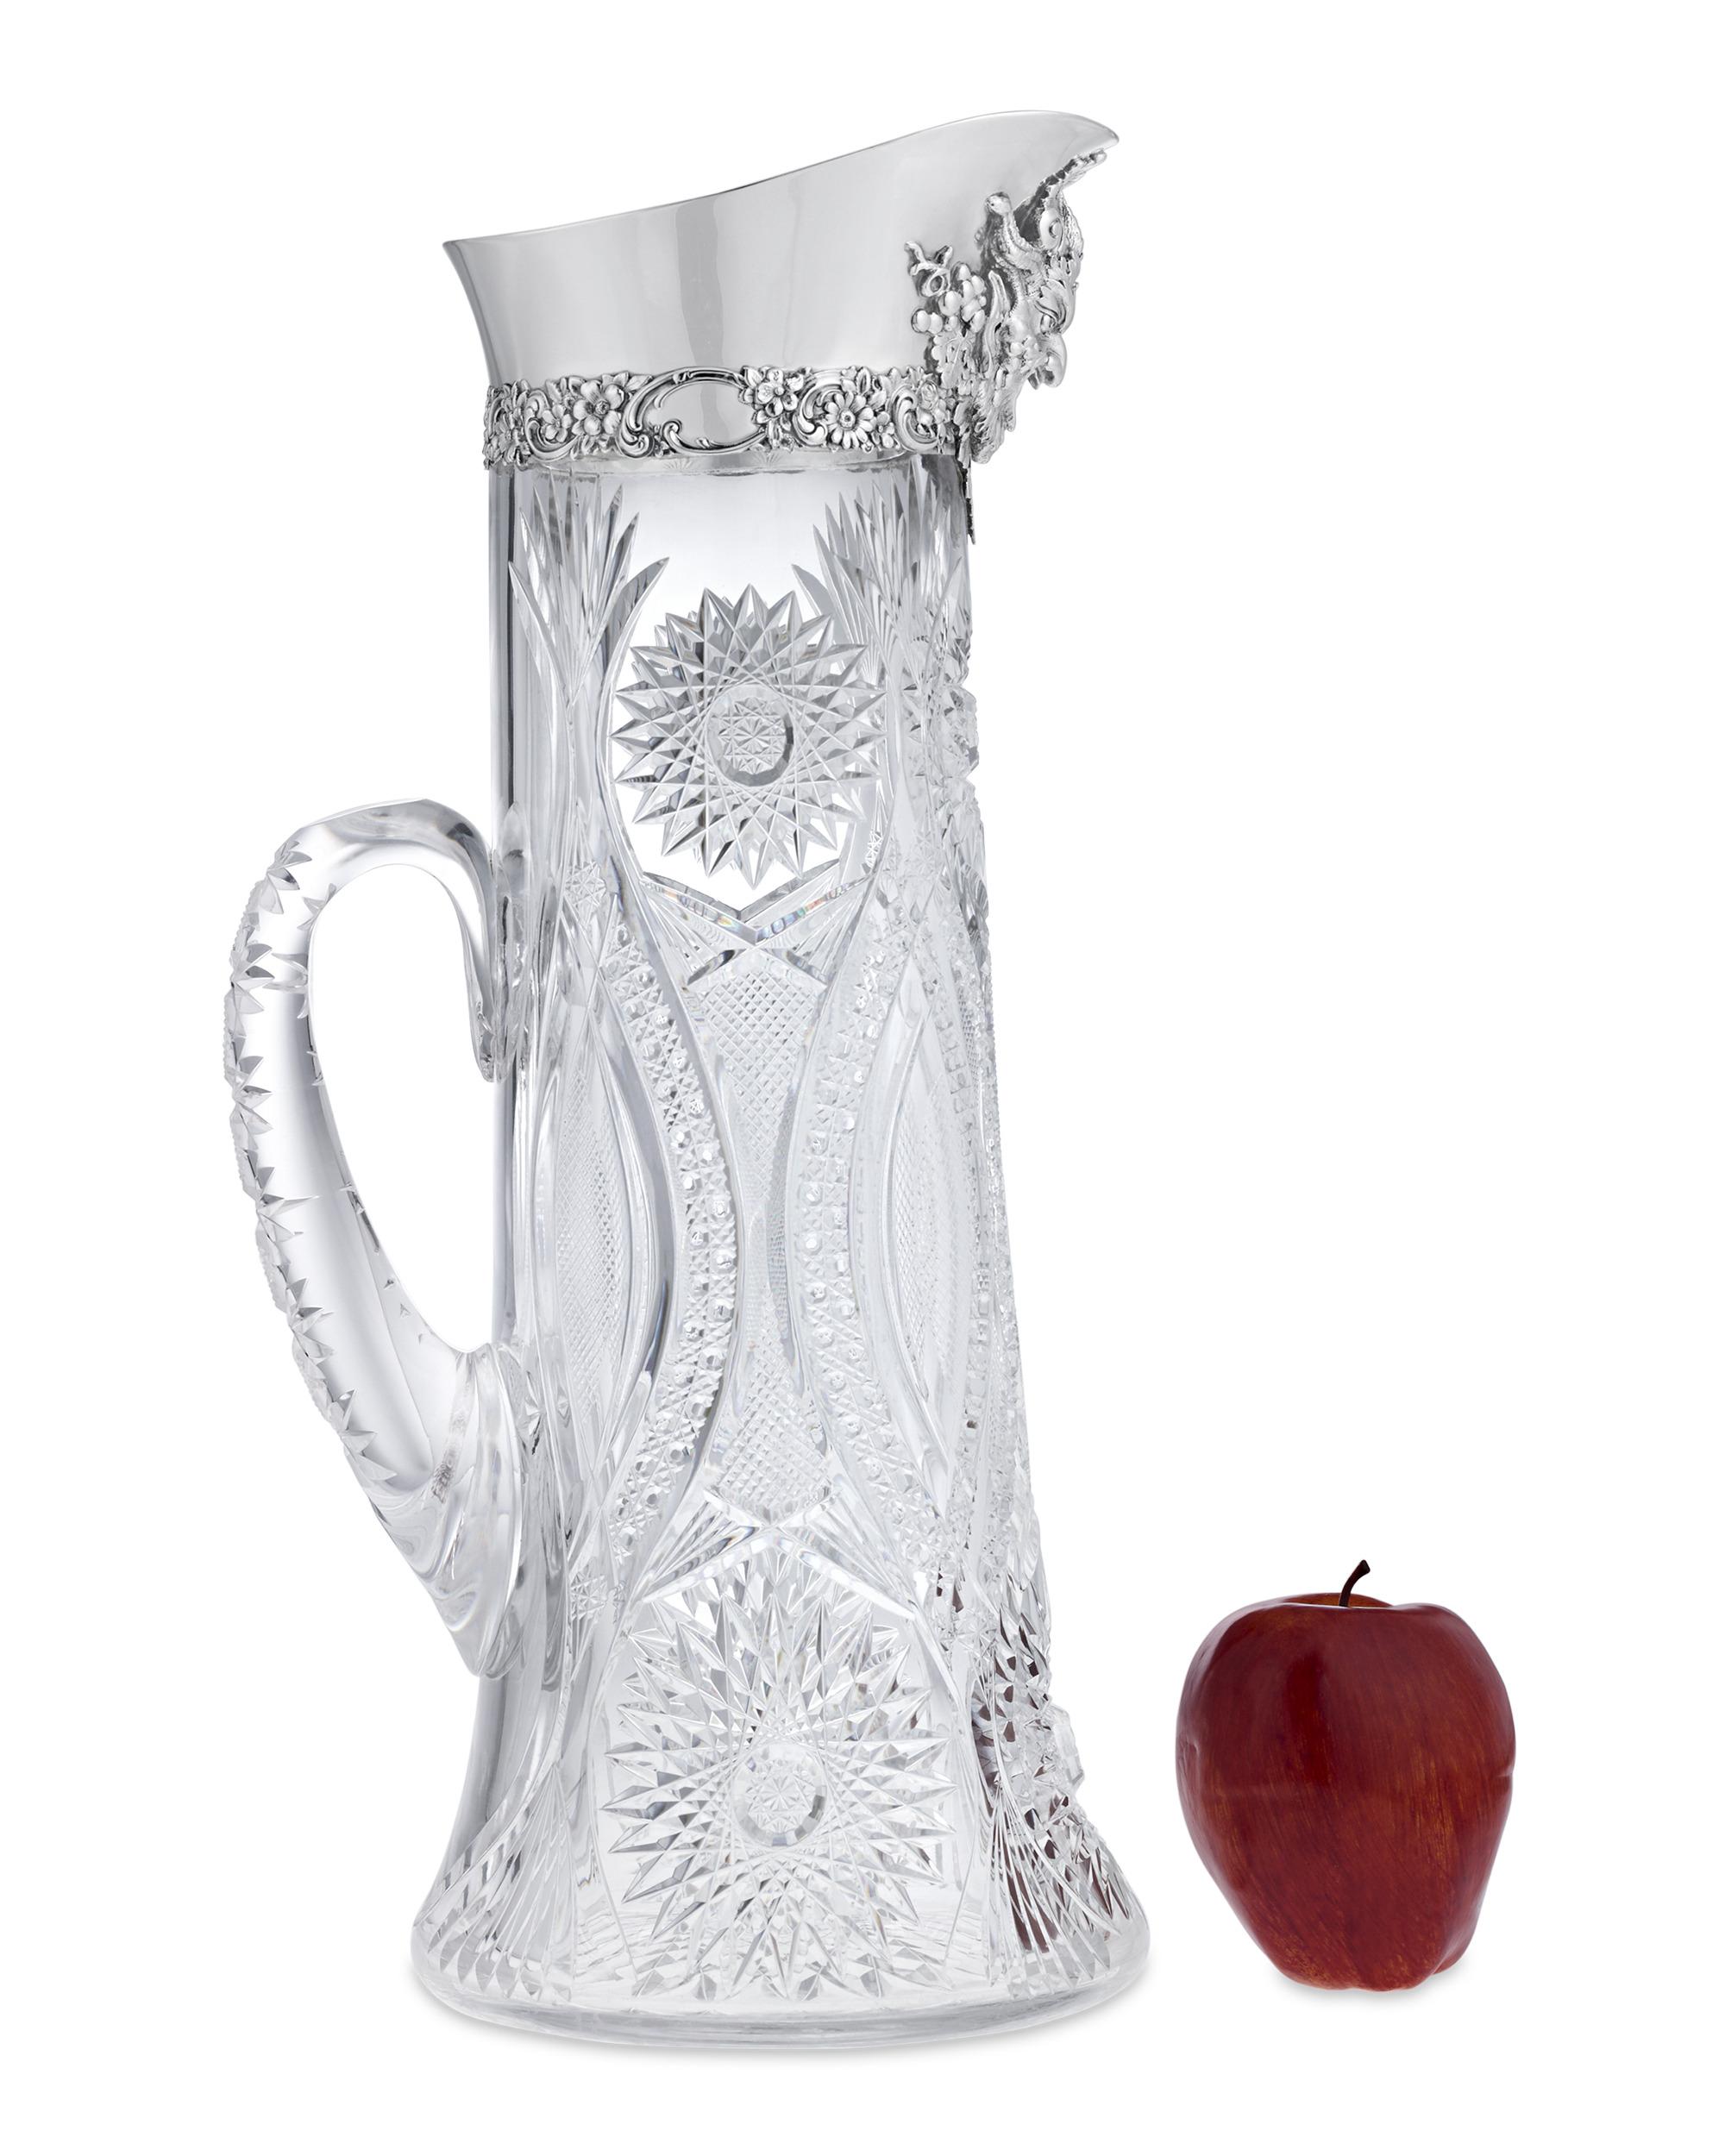 Tiffany & Co. Silver And Cut Glass Pitcher In Excellent Condition For Sale In New Orleans, LA